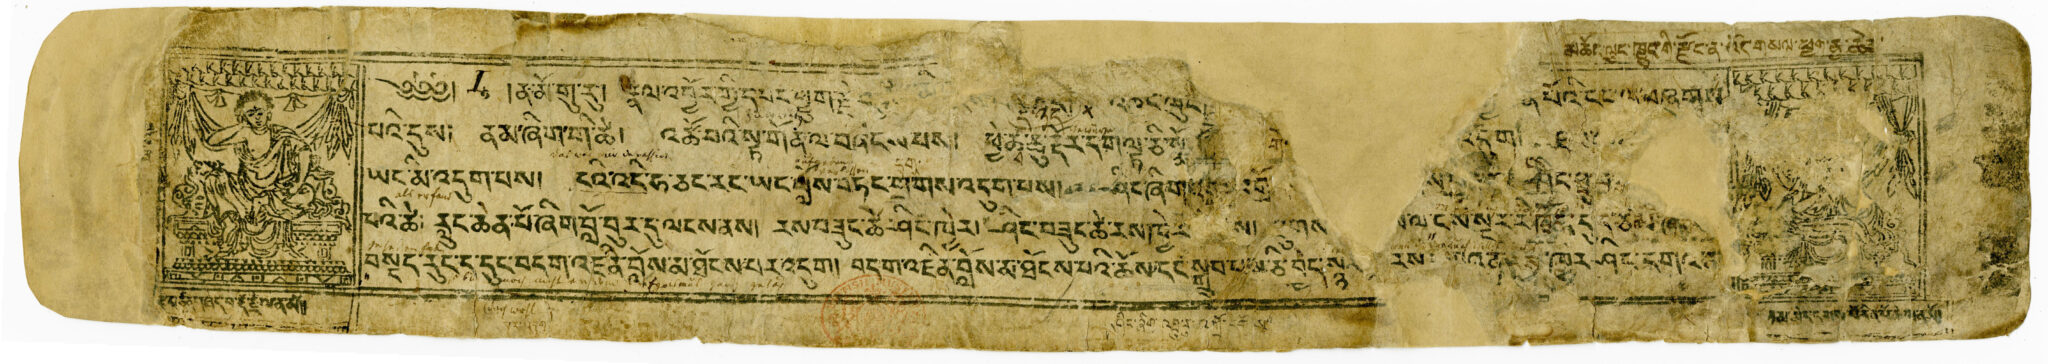 Rectangular tea-brown page featuring Tibetan text and illumination at left; fragments missing from right side